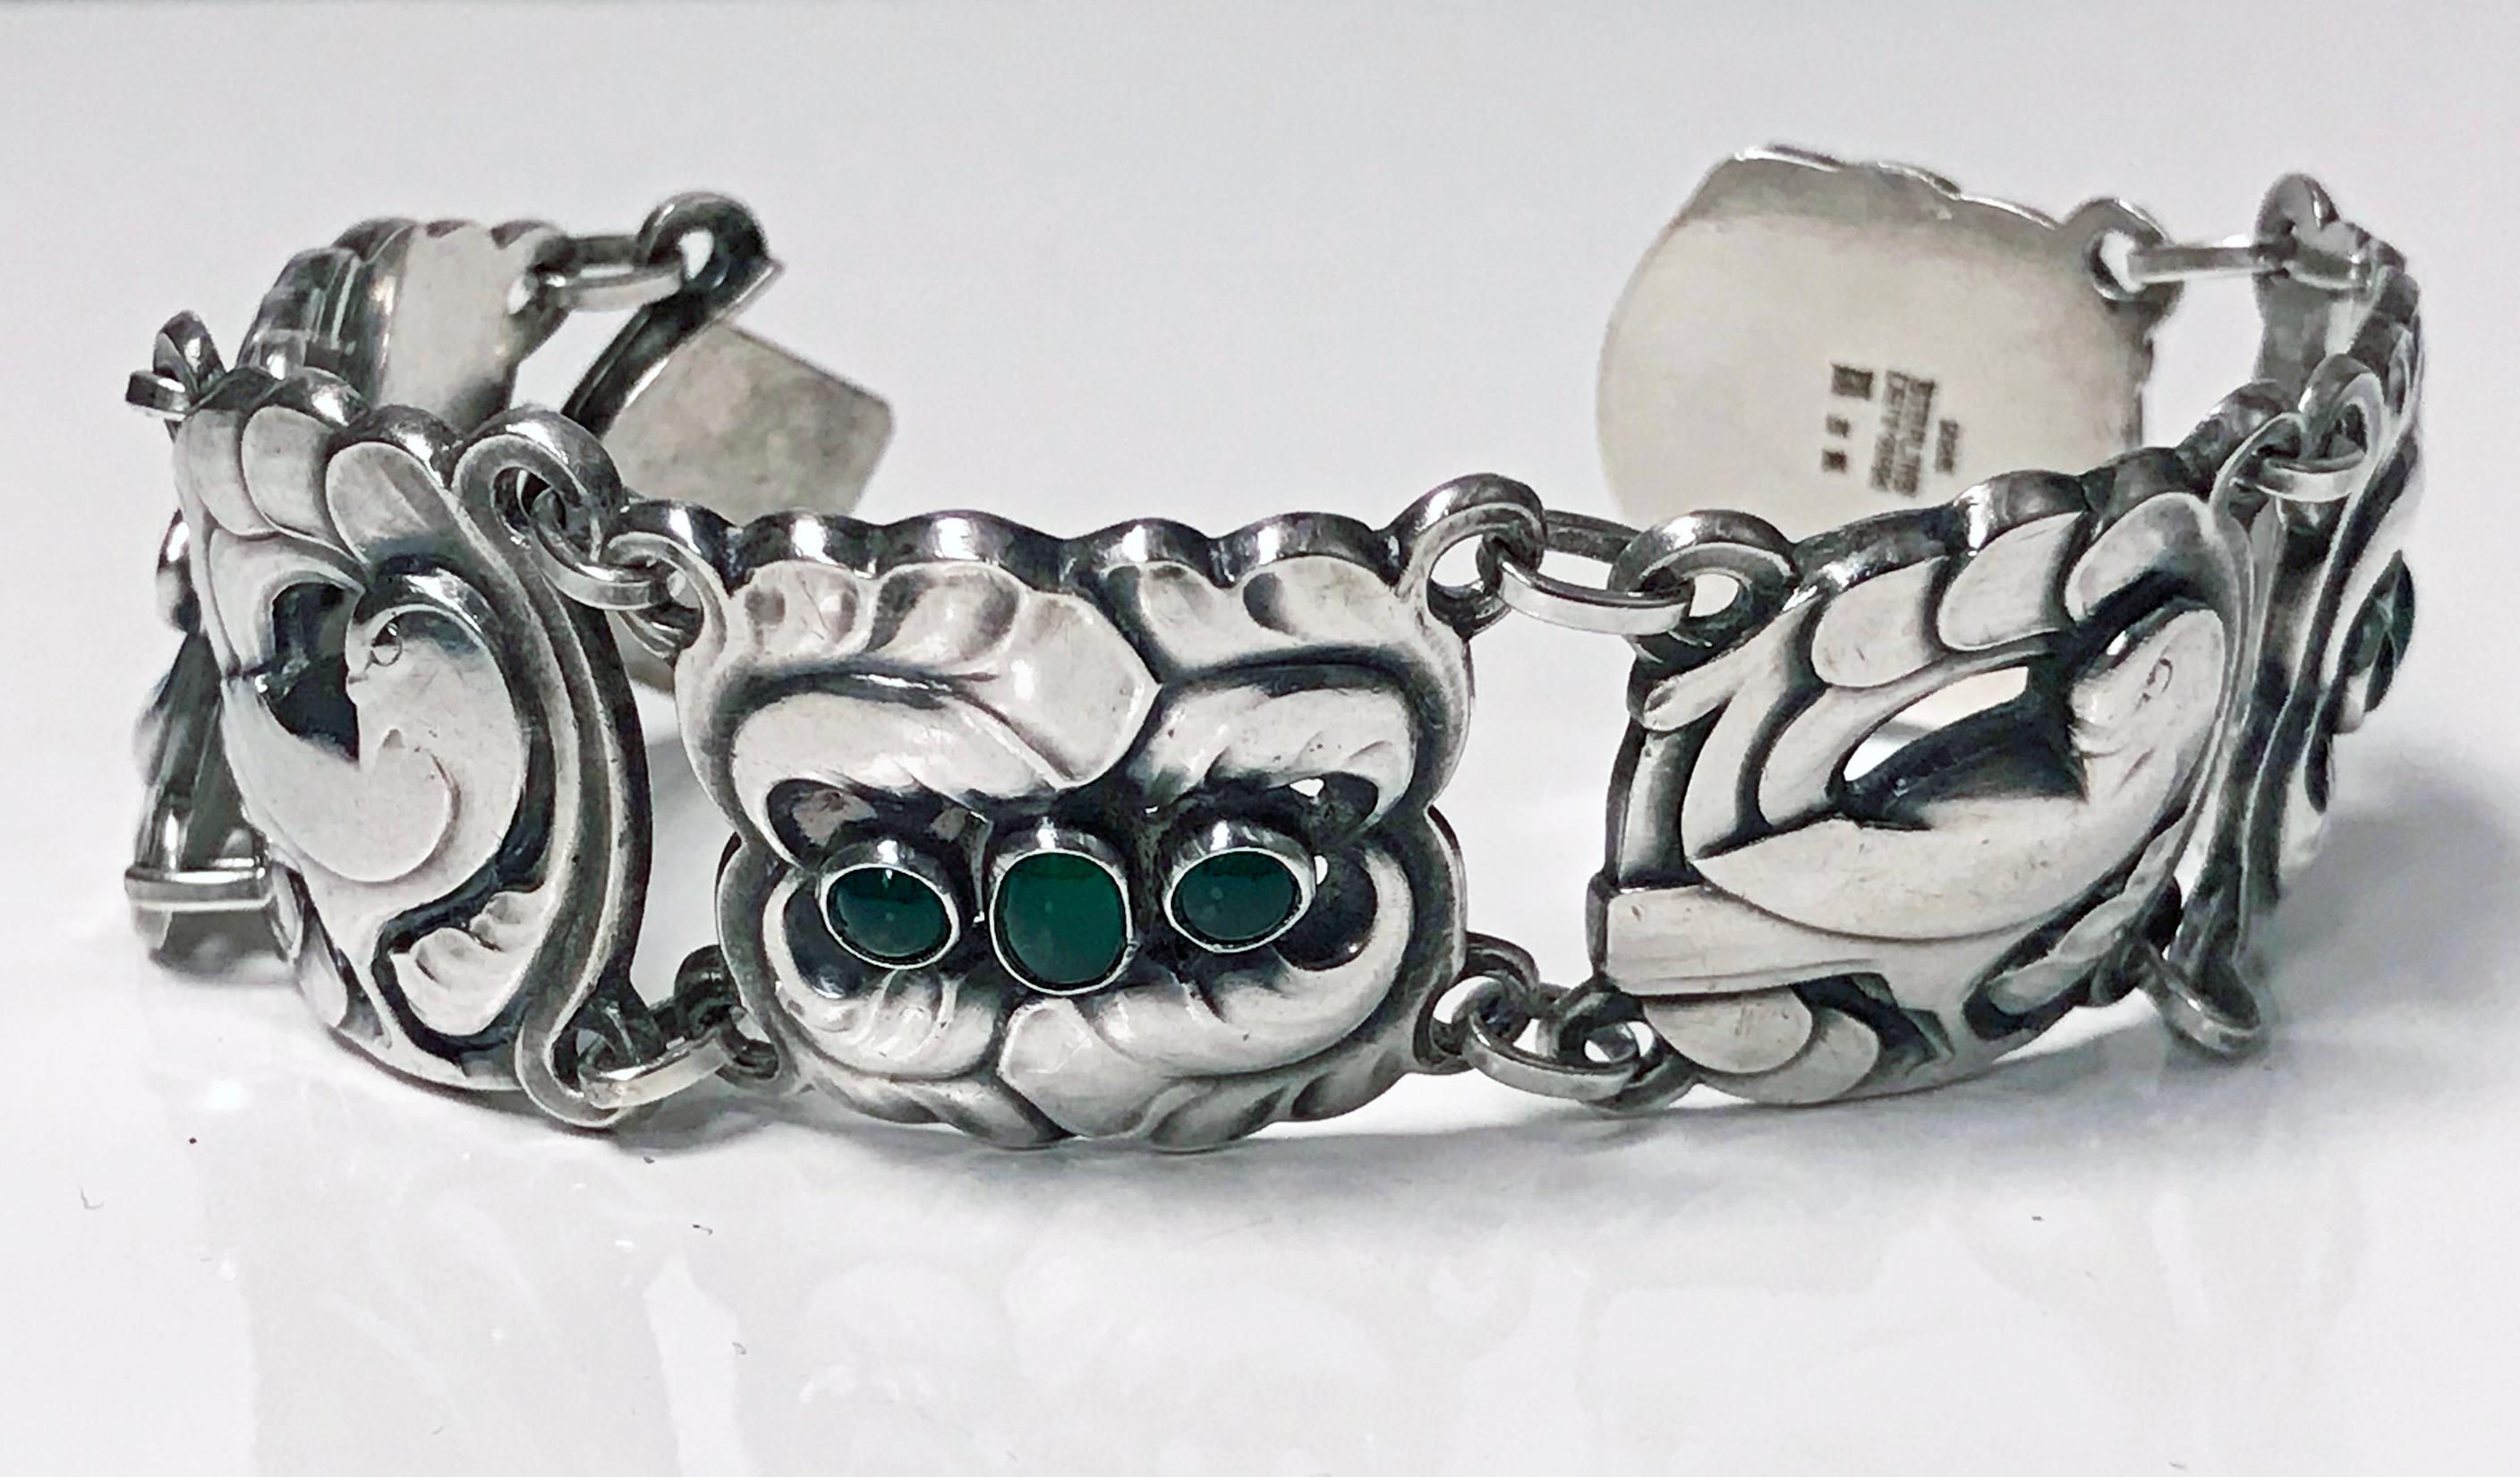 Georg Jensen Sterling Silver Chrysoprase Dove Bracelet No 32, 1933-44 mark. This is a rarely seen wide example of Chrysoprase dove motif designed by Kristian Moehl-Hansen for Georg Jensen originally in 1904. Stamped with Georg Jensen marks GJ in box